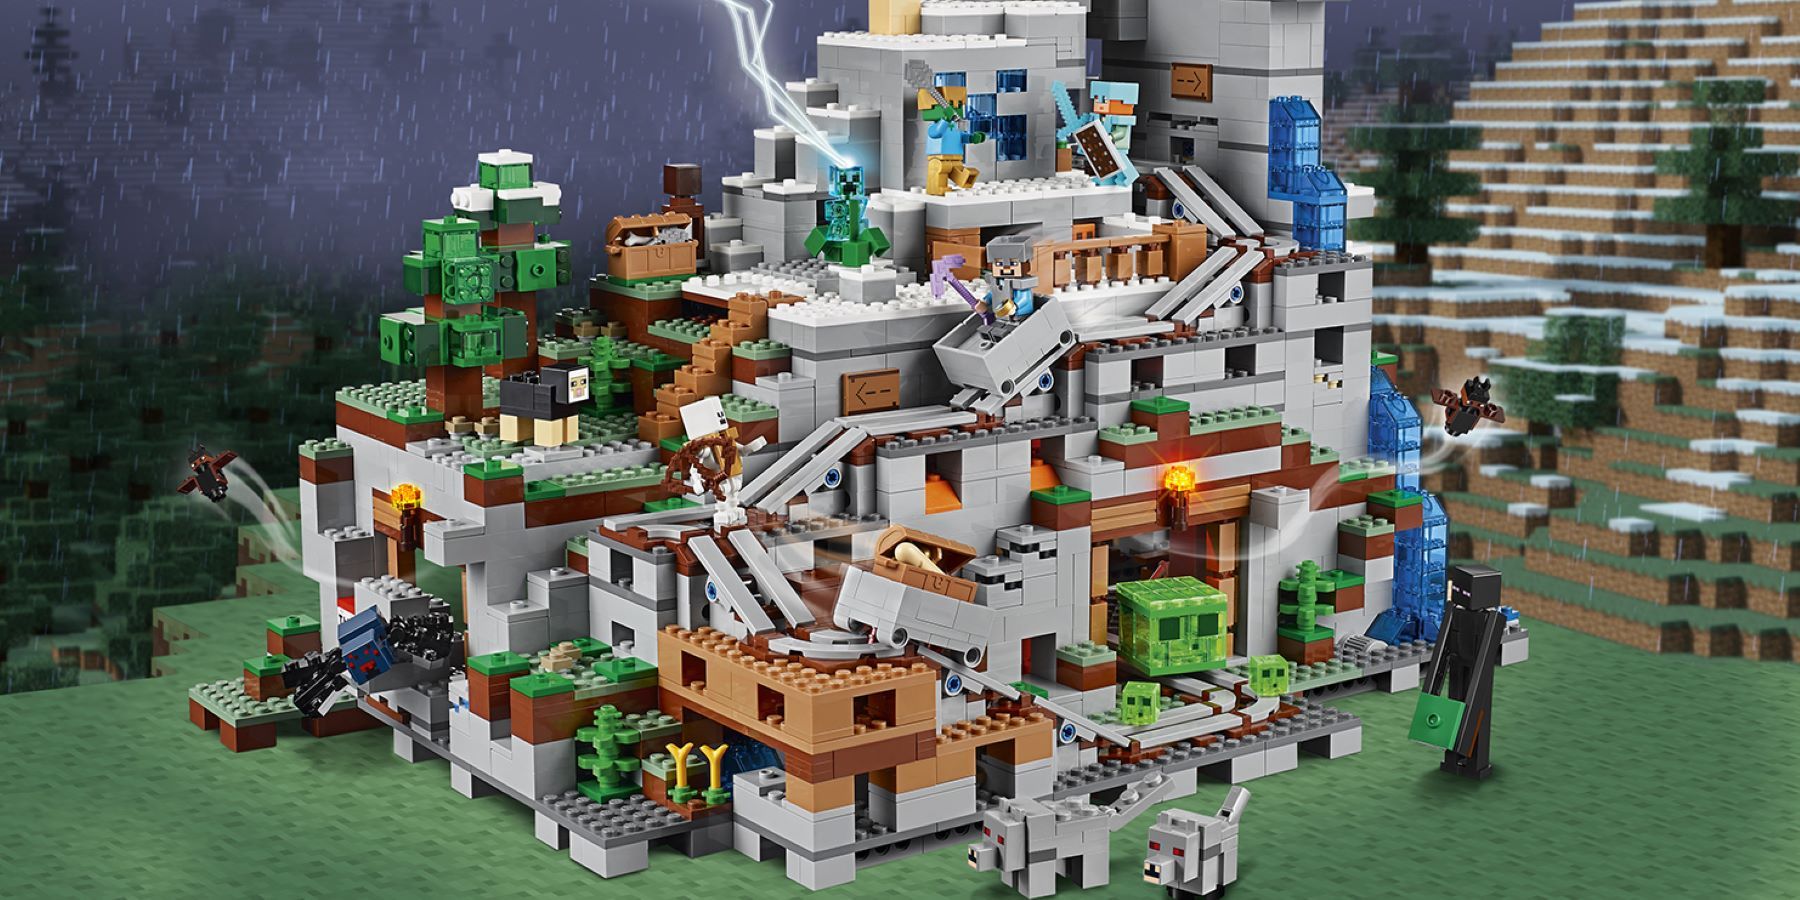 Promotional image of the LEGO Minecraft set The Mountain Cave